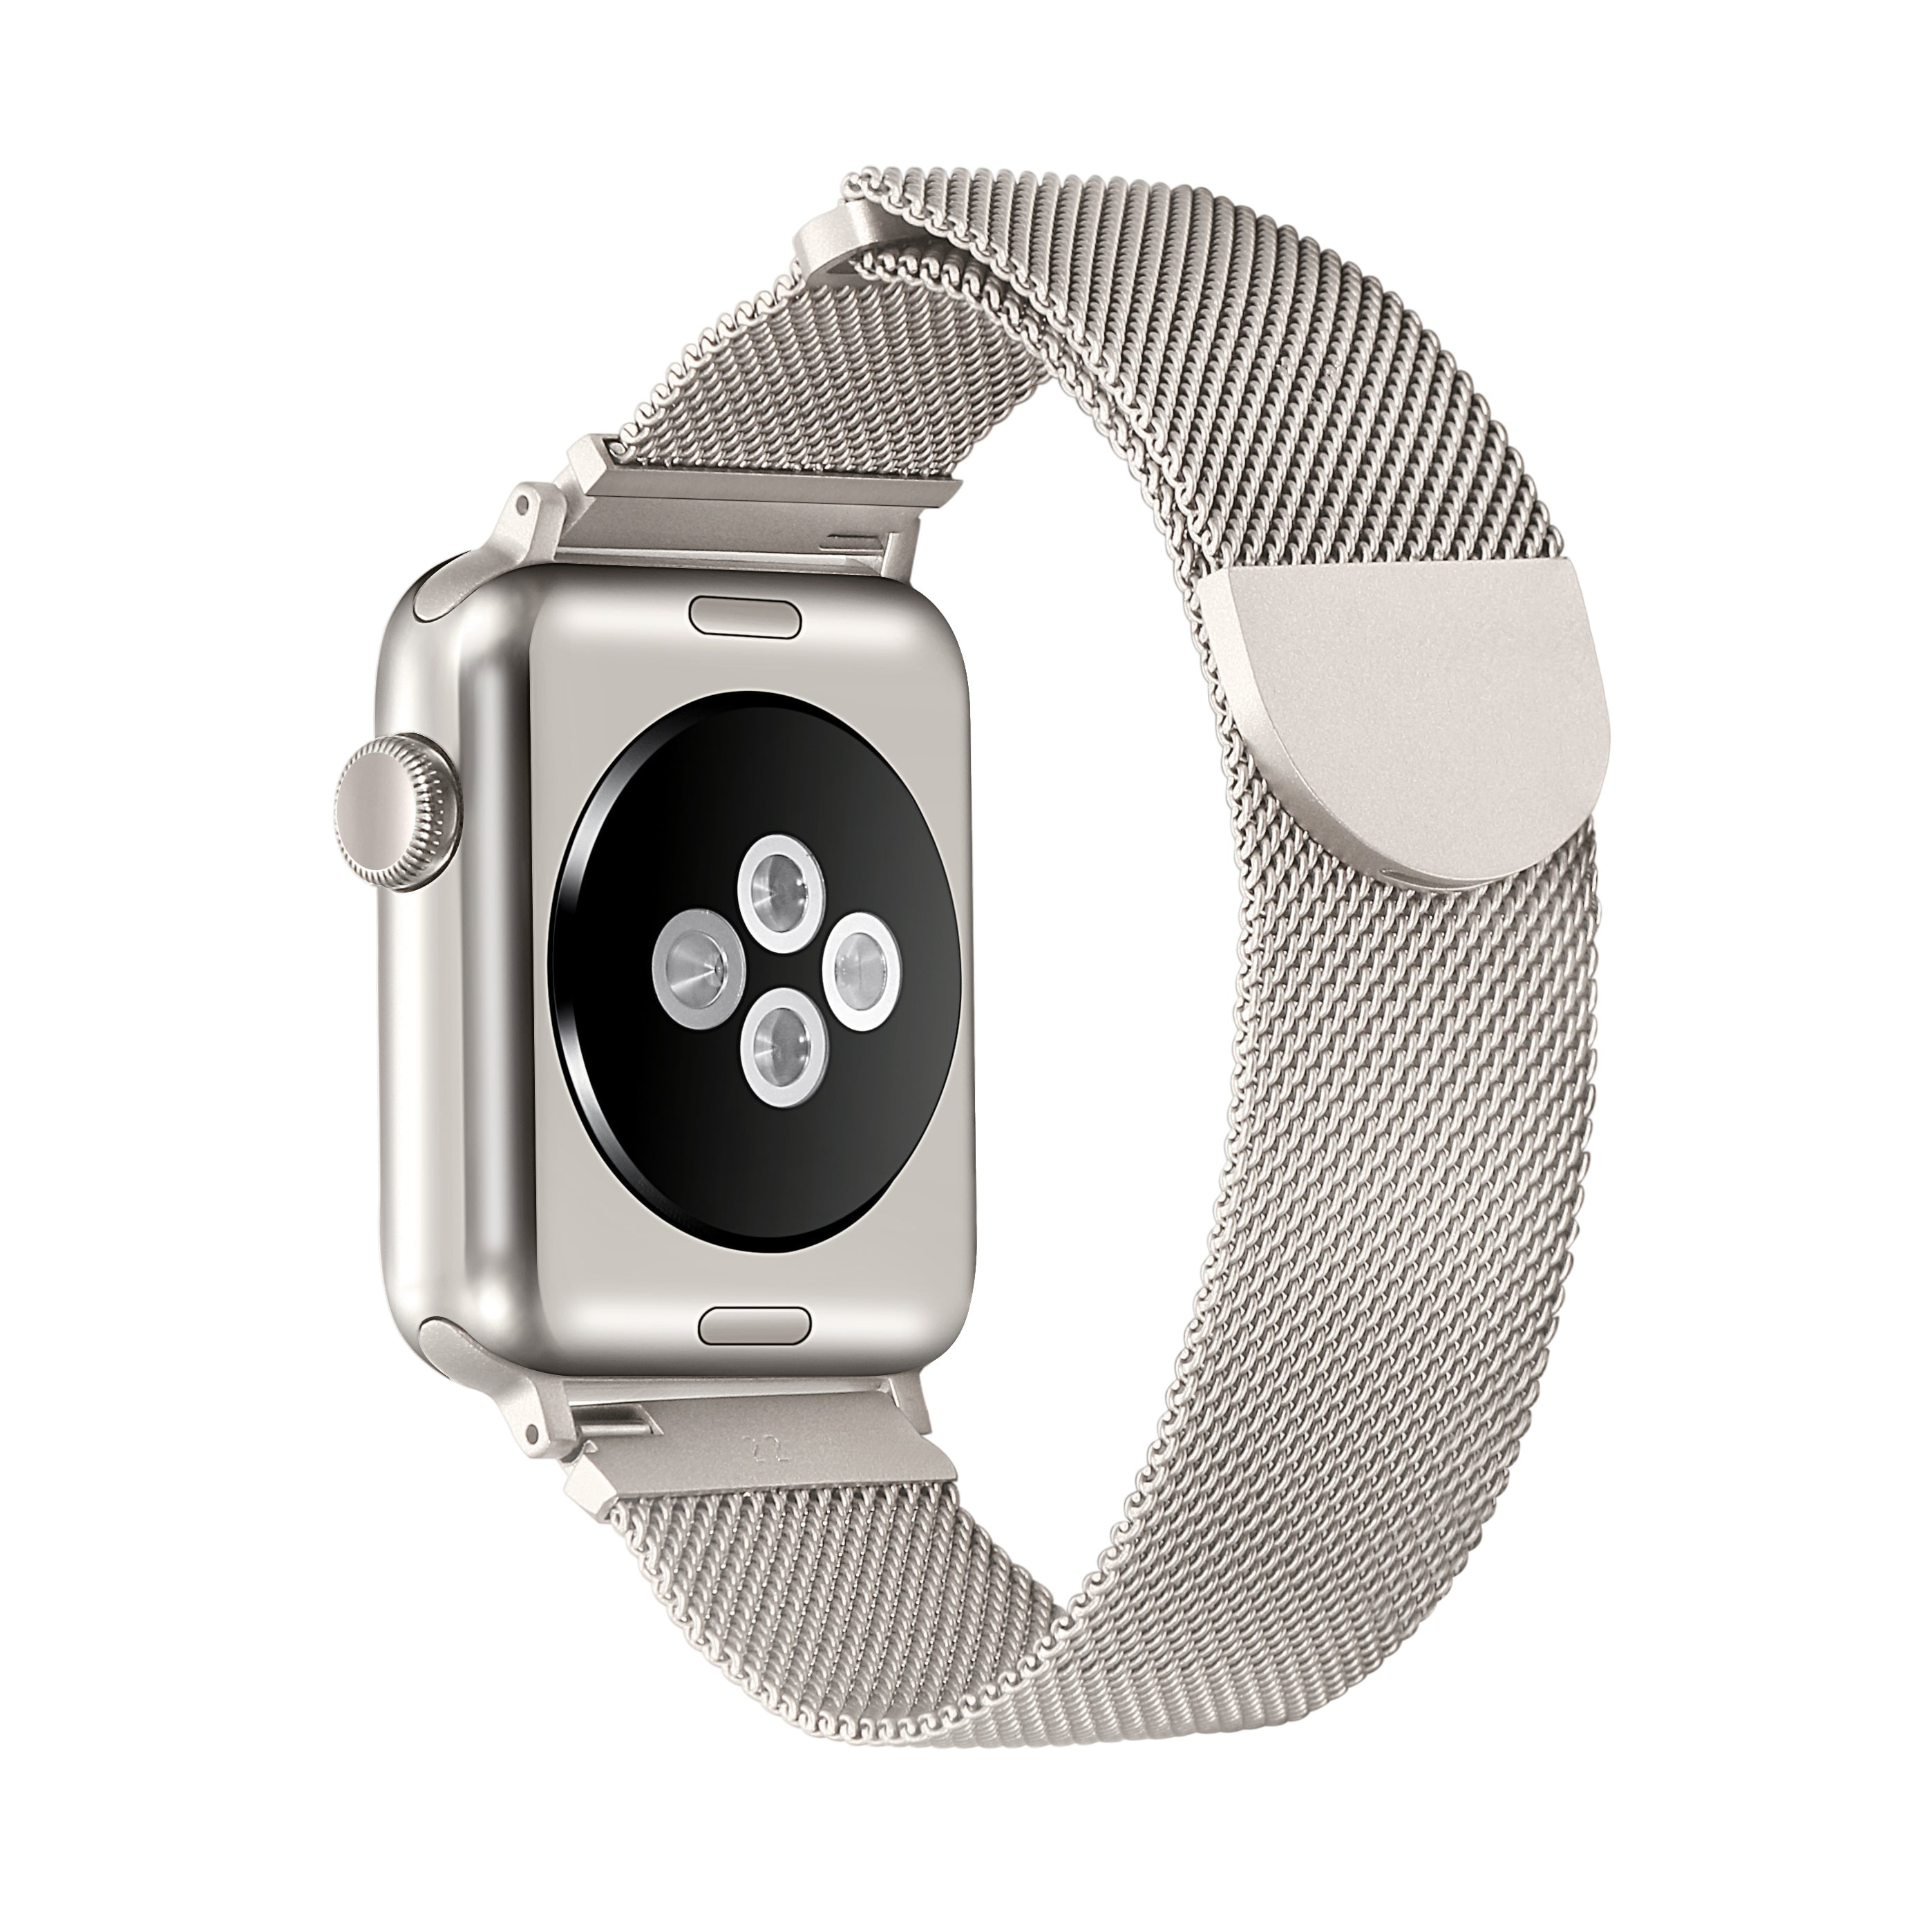 Worryfree Gadgets Odash LX05-SLV49 3 in. 49 mm Classic Stainless Steel Band for Apple Watch Ultra - Silver